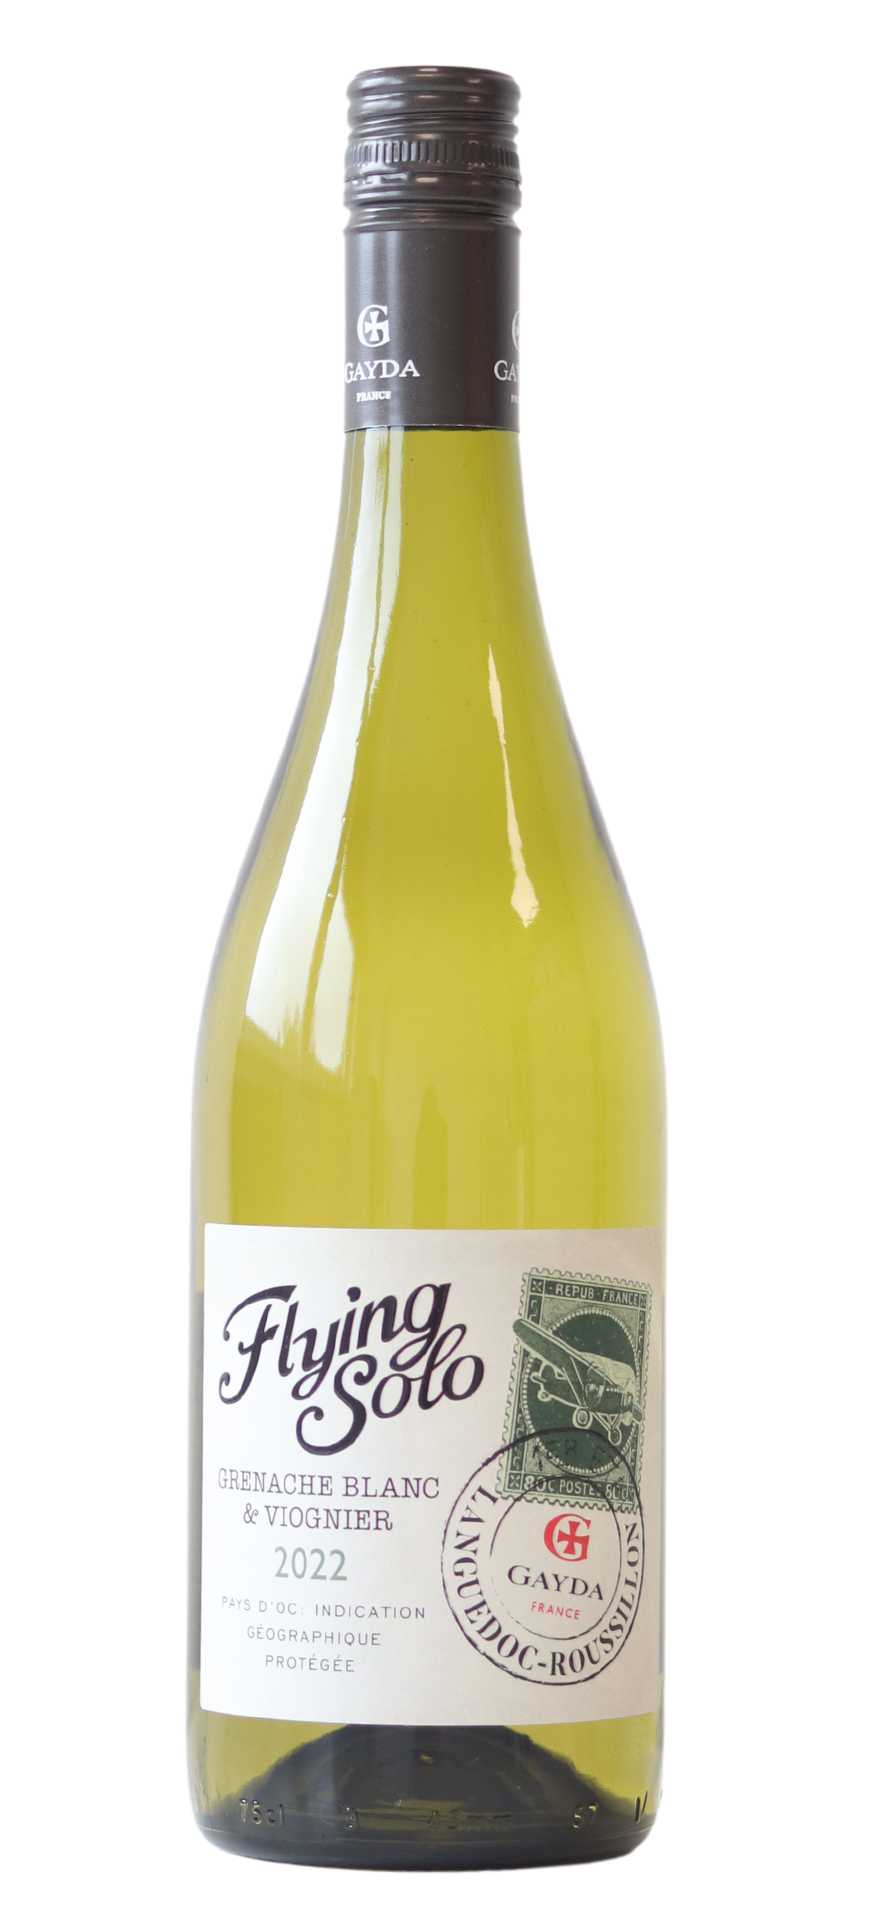 Domaine Gayda Flying Solo Grenache Blanc/Viognier, Pays d'Oc